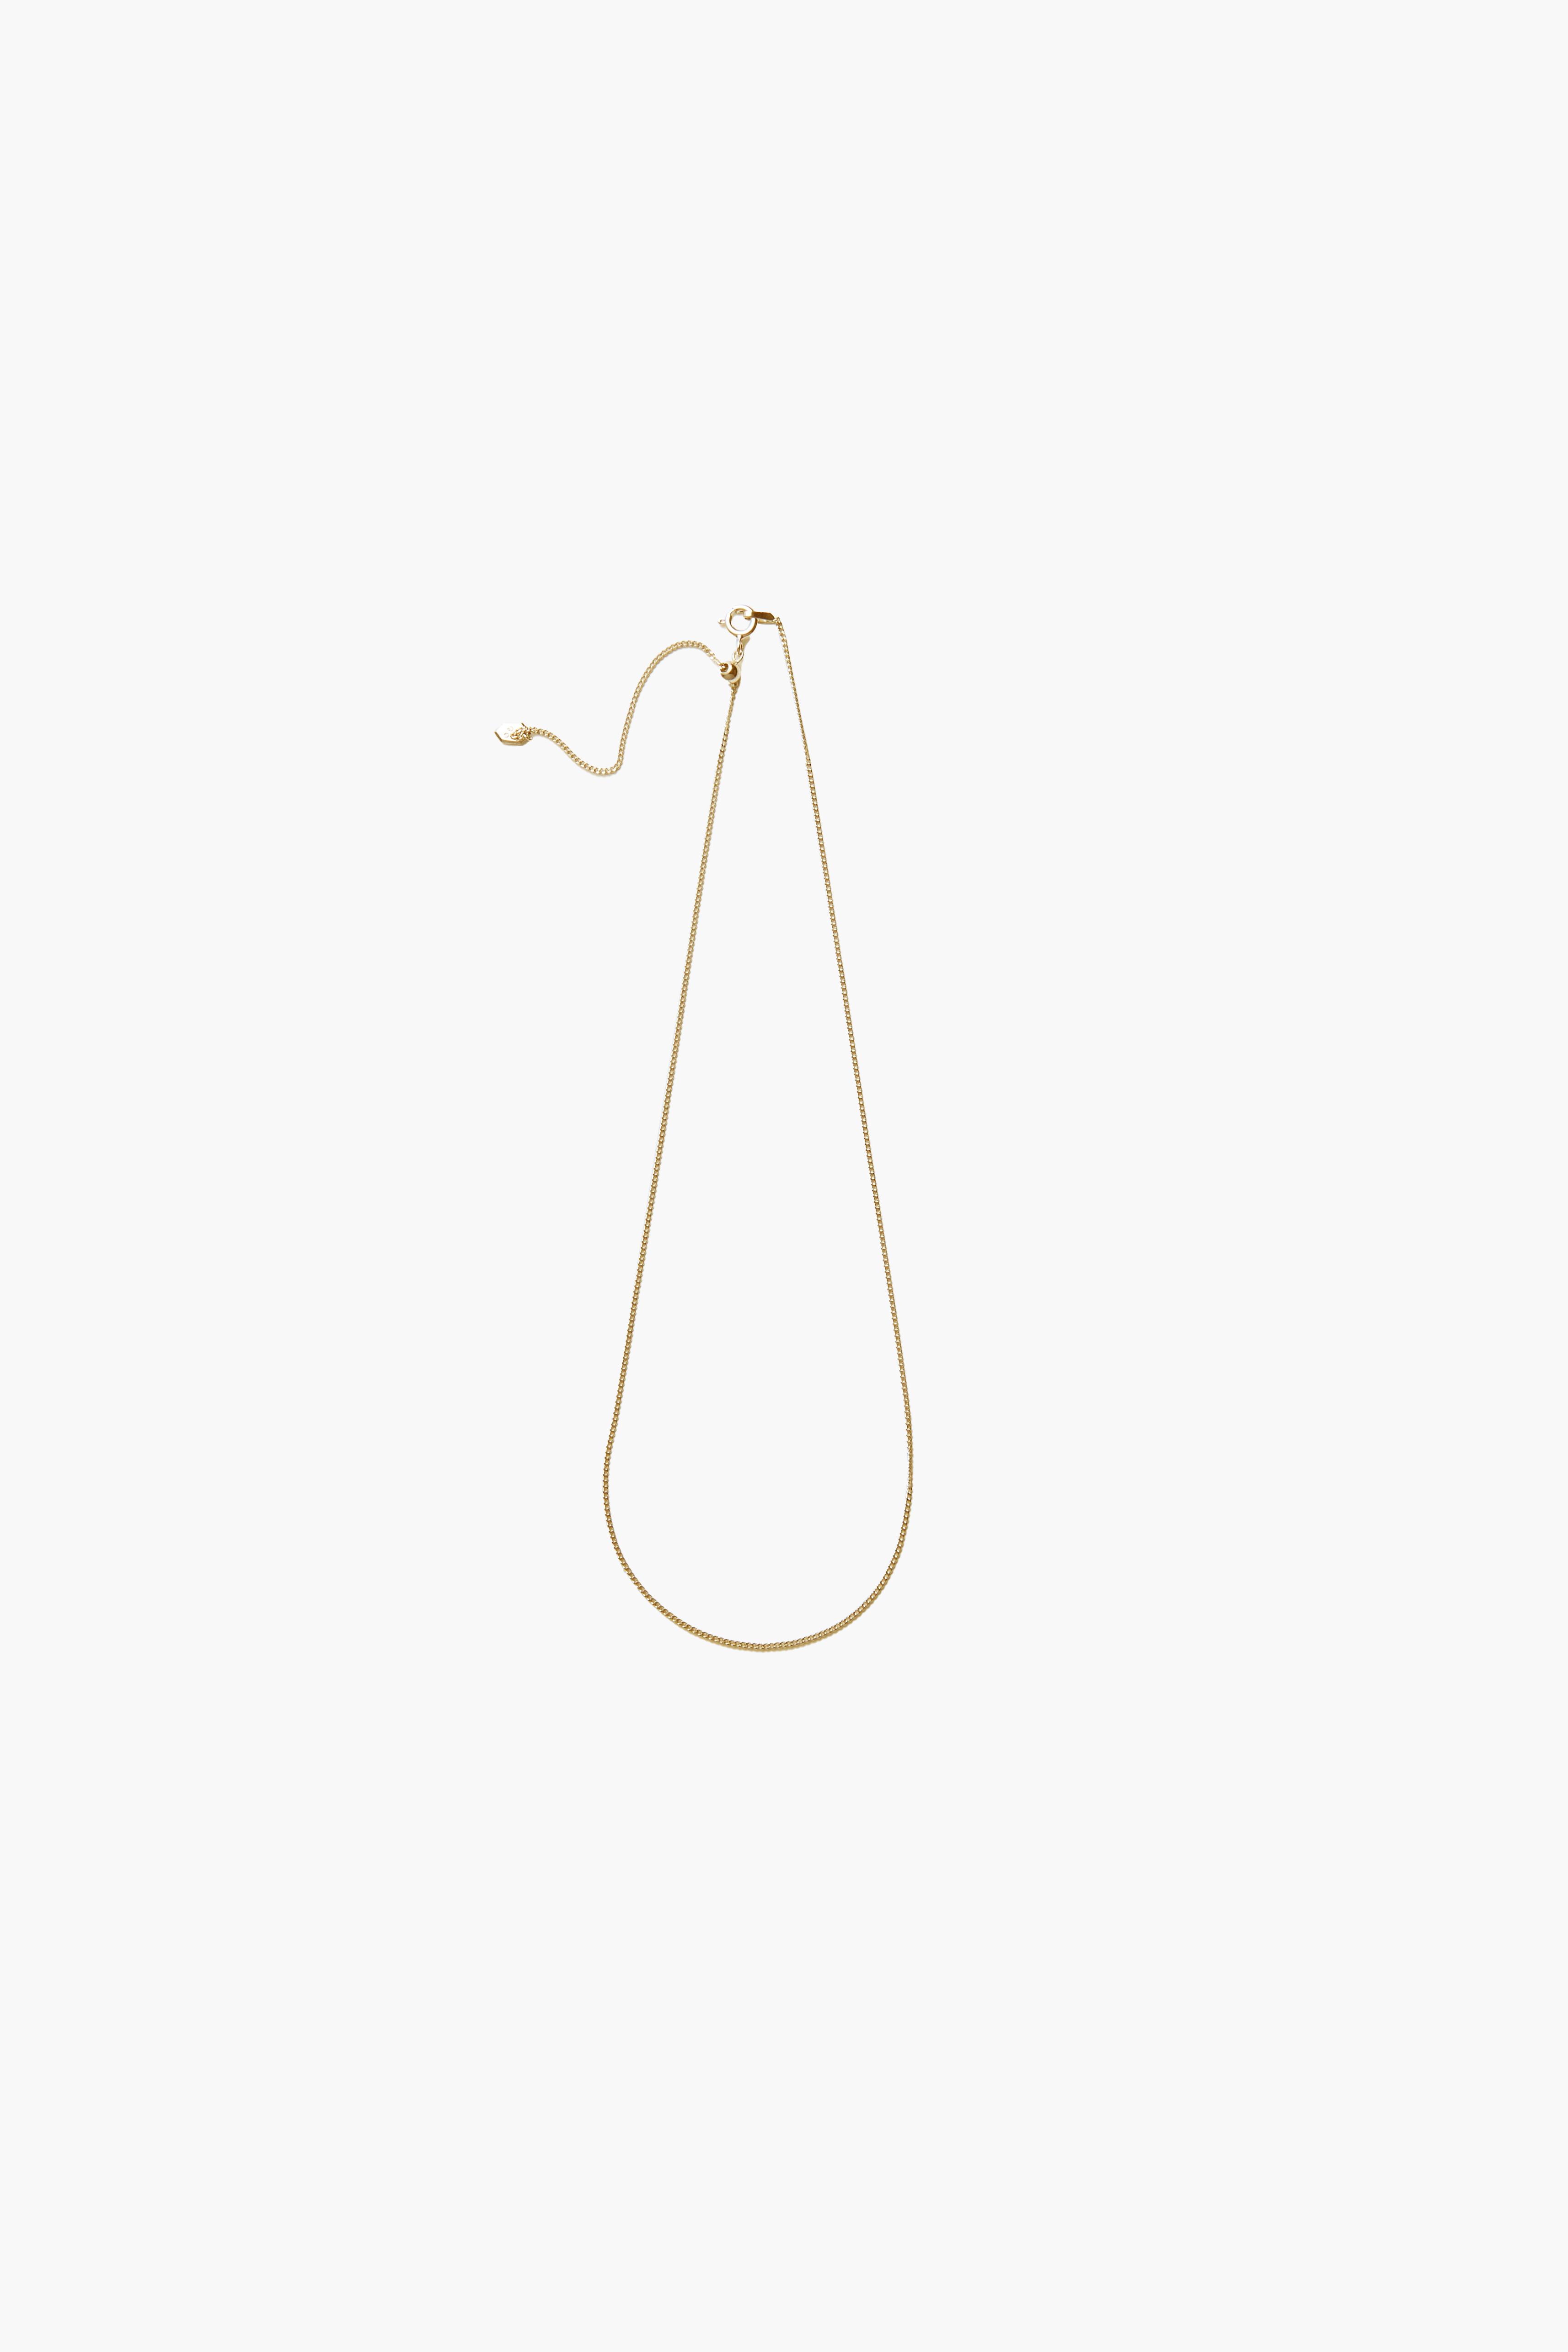 Nyhavn 55 Necklace - Yellow Gold